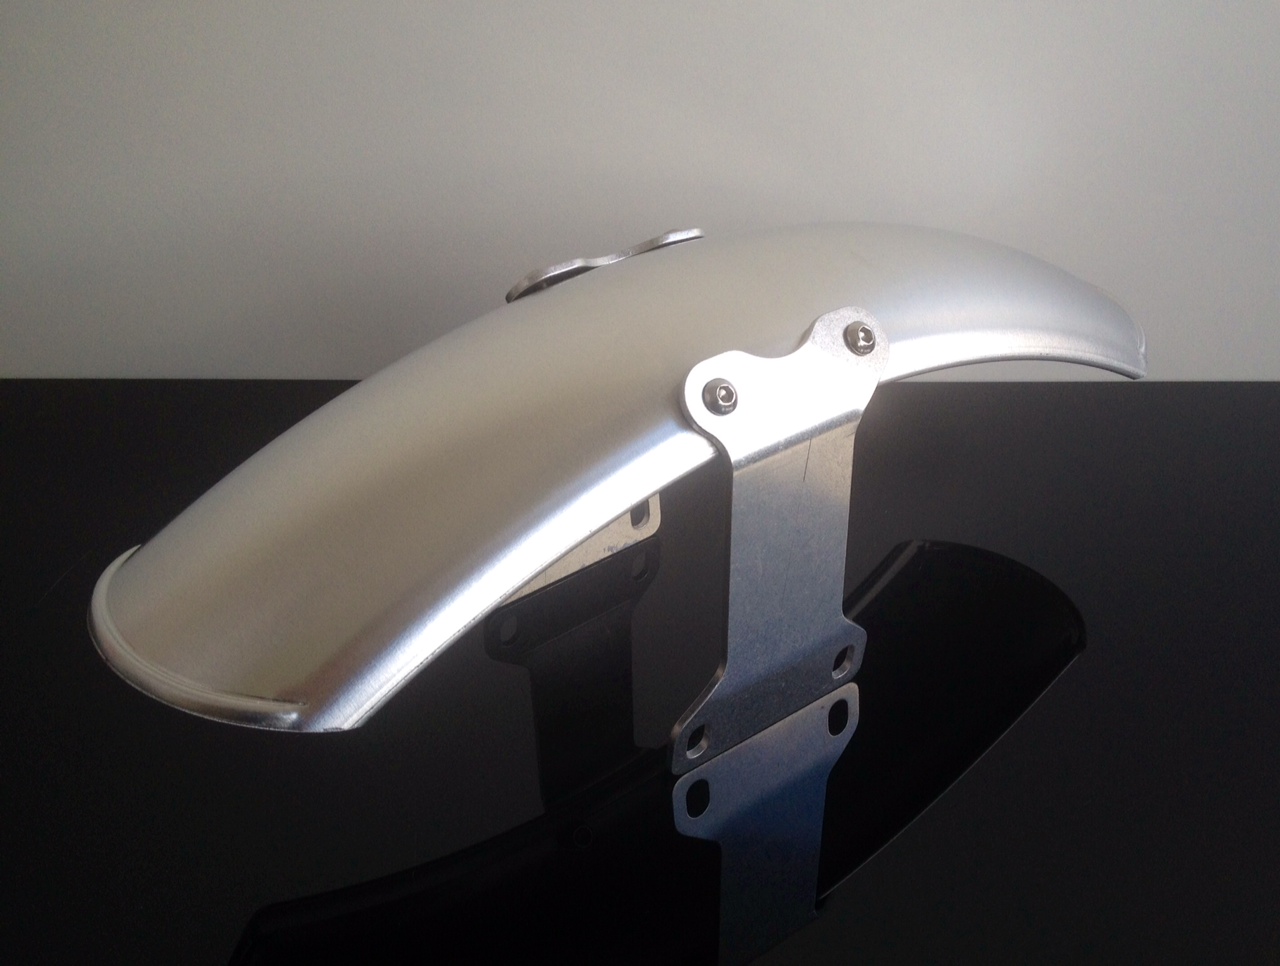 CAFE-RACER ALLOY front Fender Yamaha SR 500 with 18" front ...